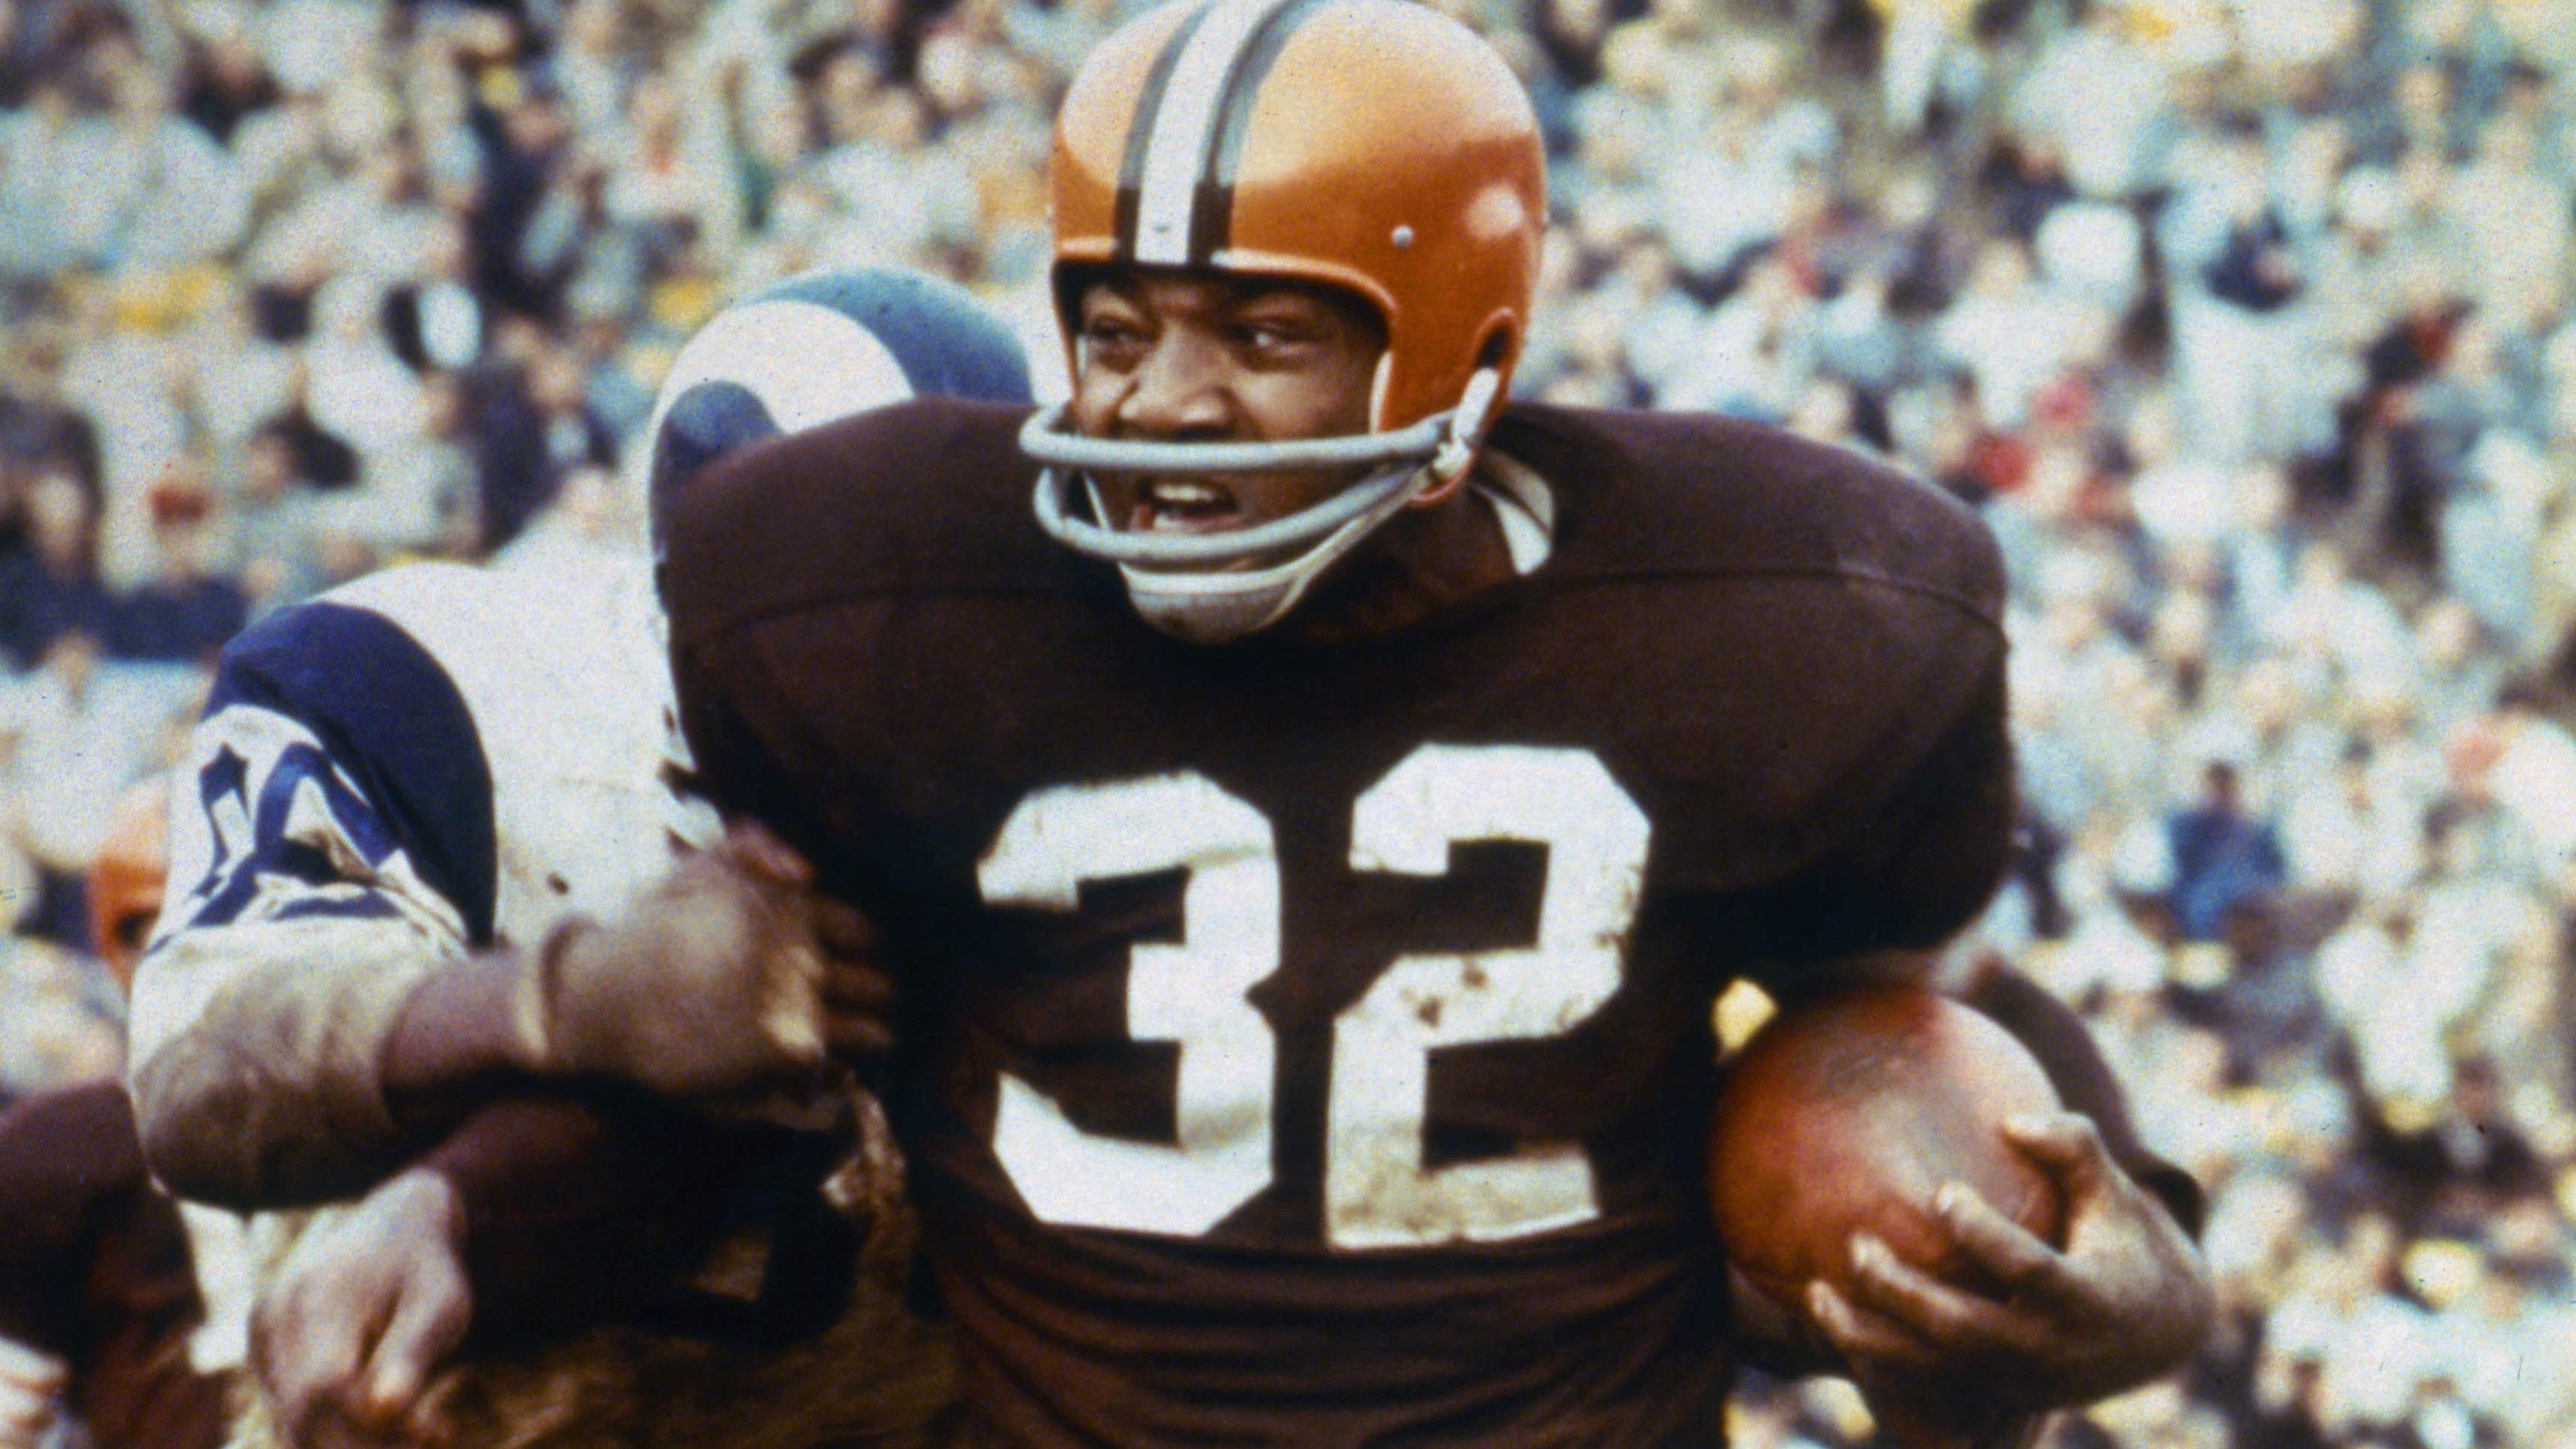 Cleveland Browns running back Jim Brown in 1965.